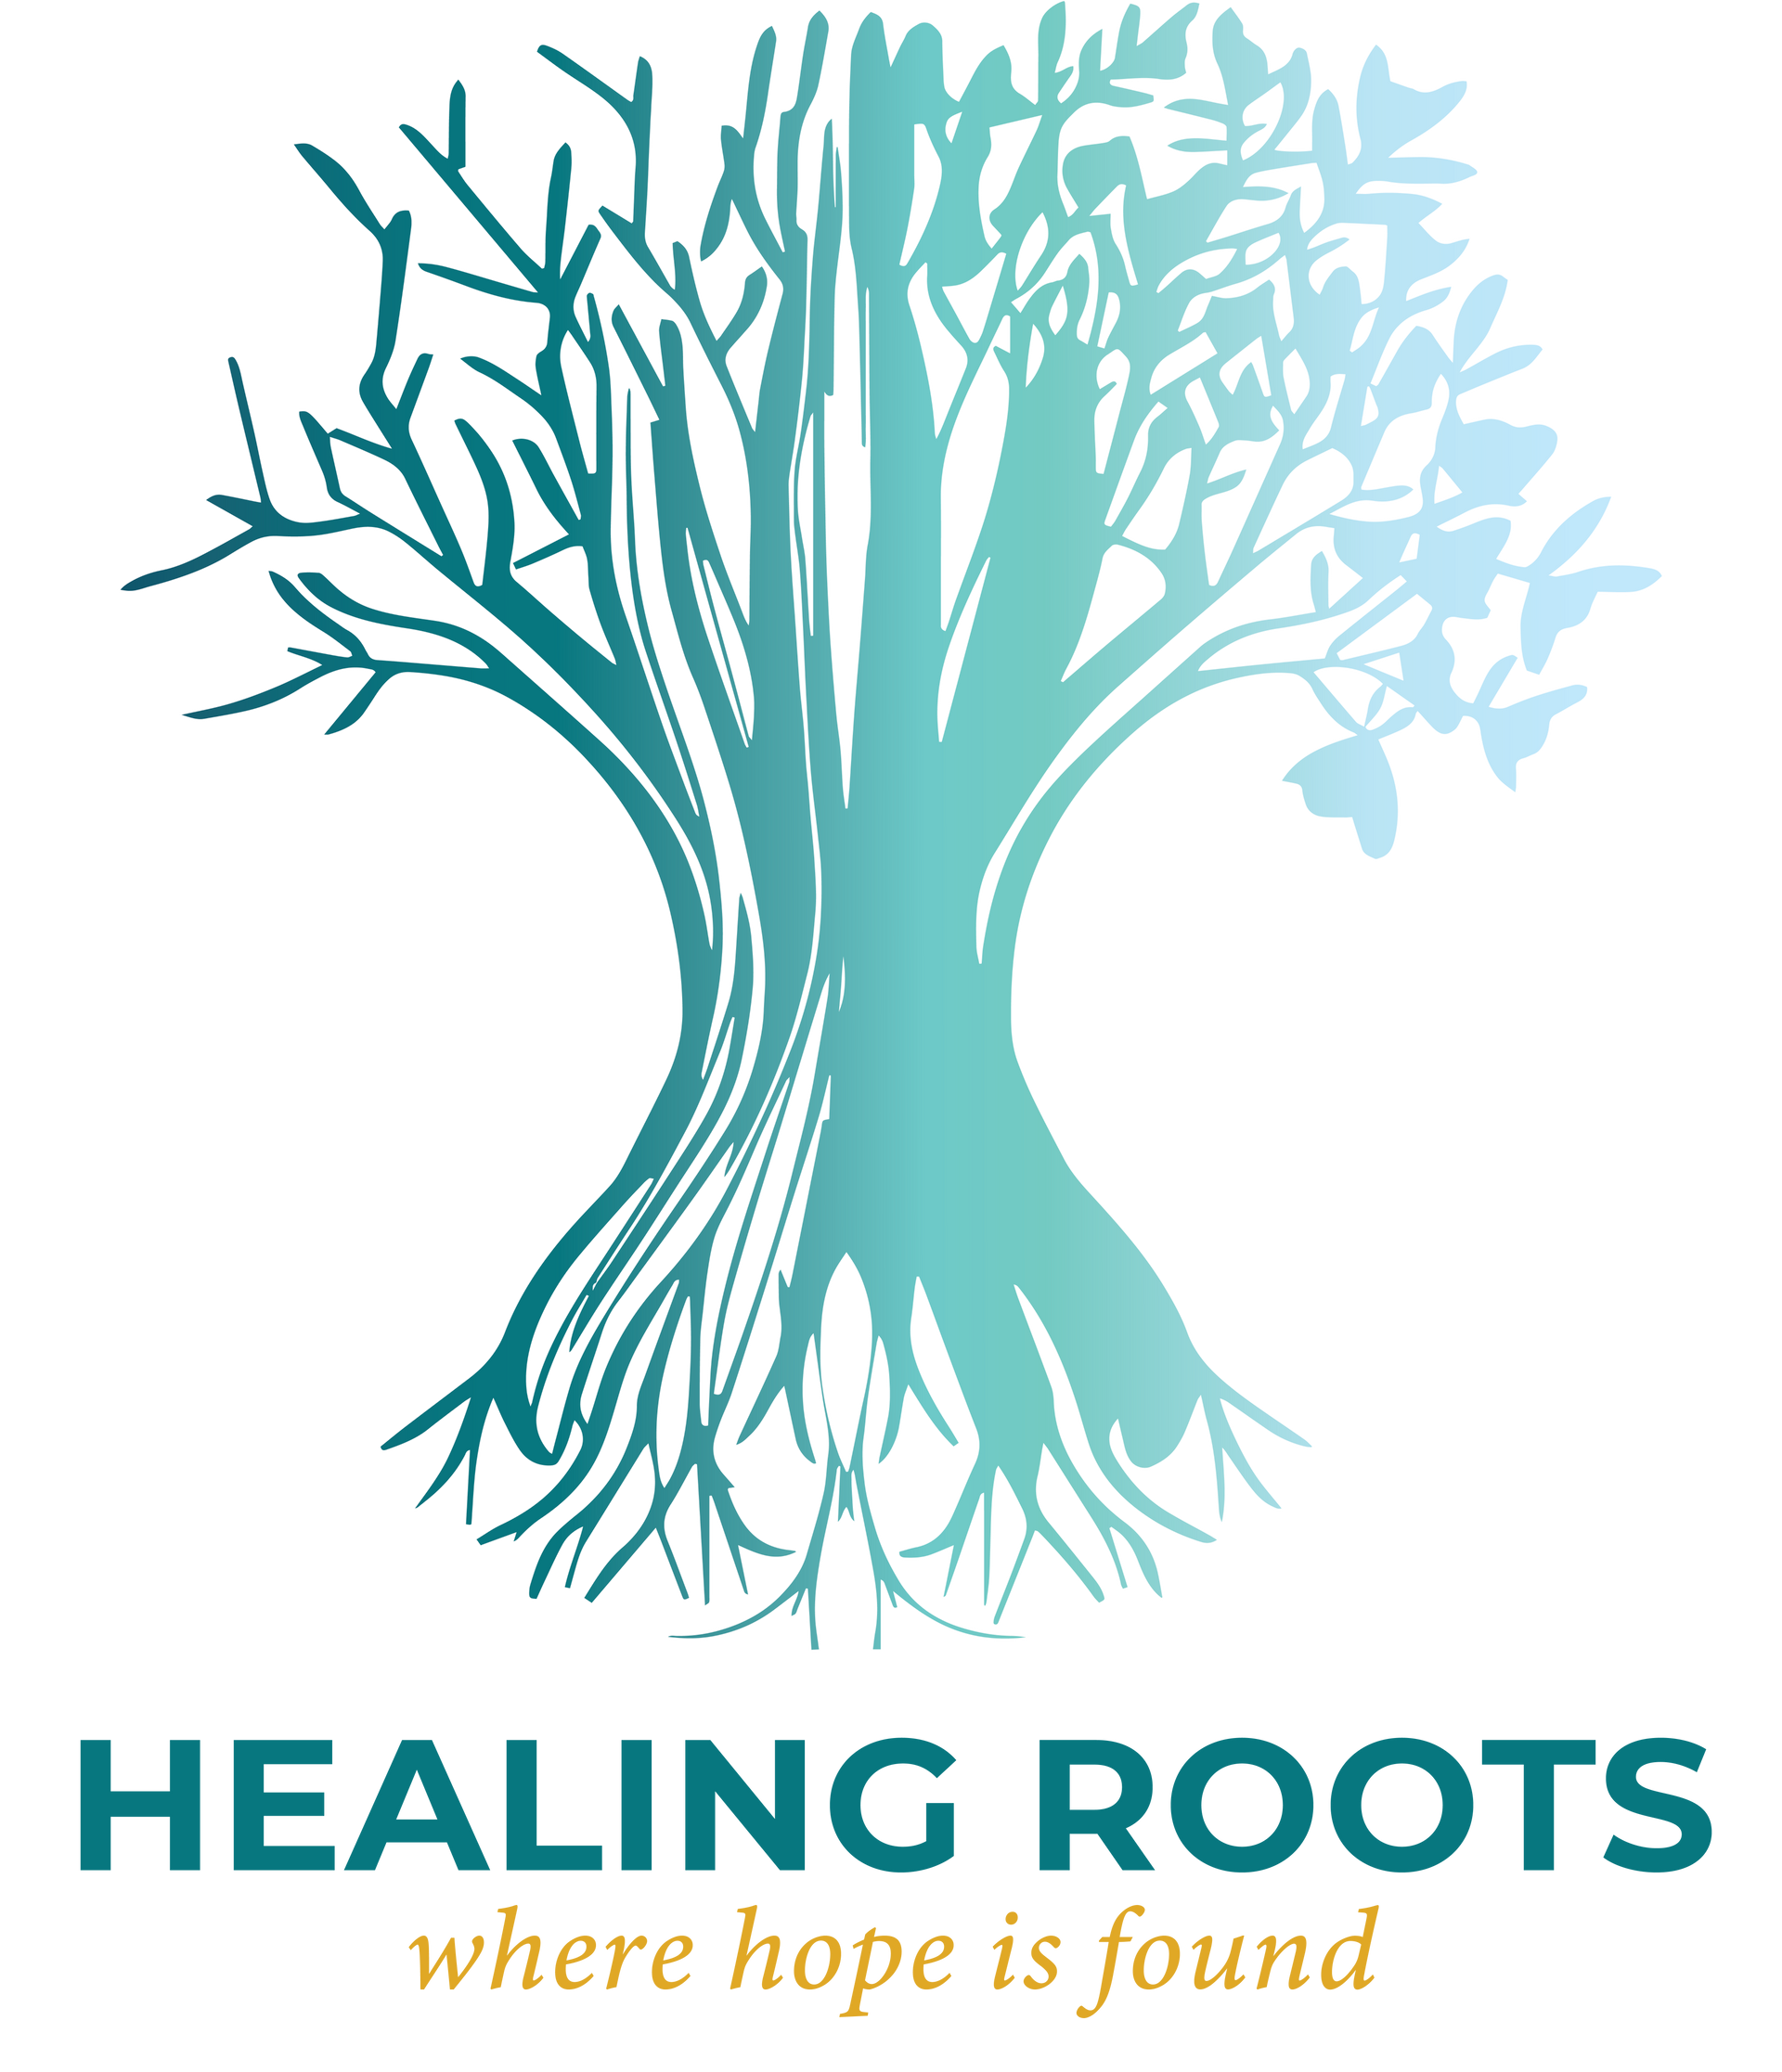 Healing Roots: Where Hope Is Found